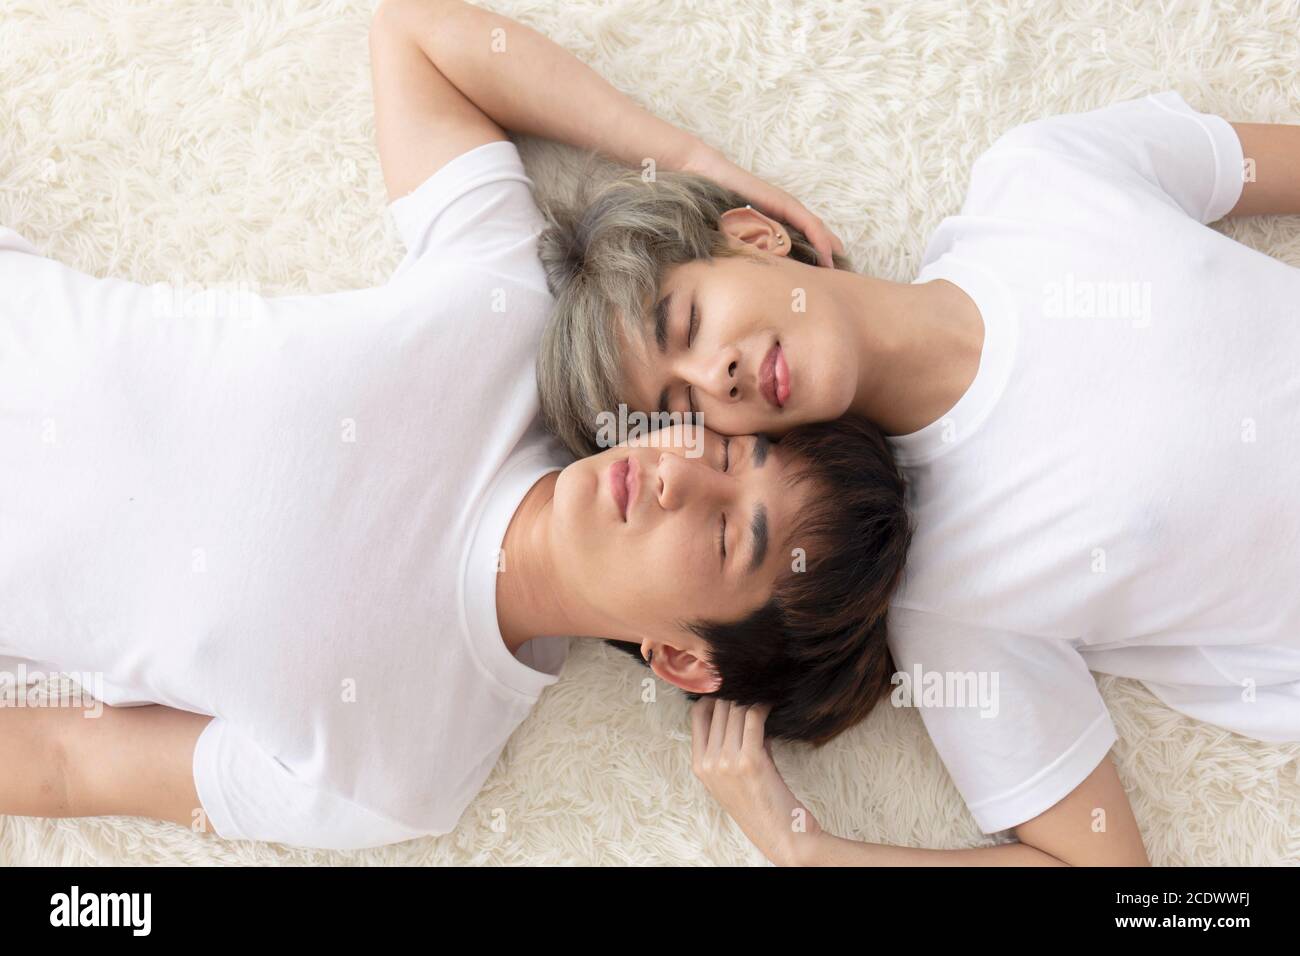 Download this stock image: Gay Couples Young Boys Asian Men LGBT Concepts. 